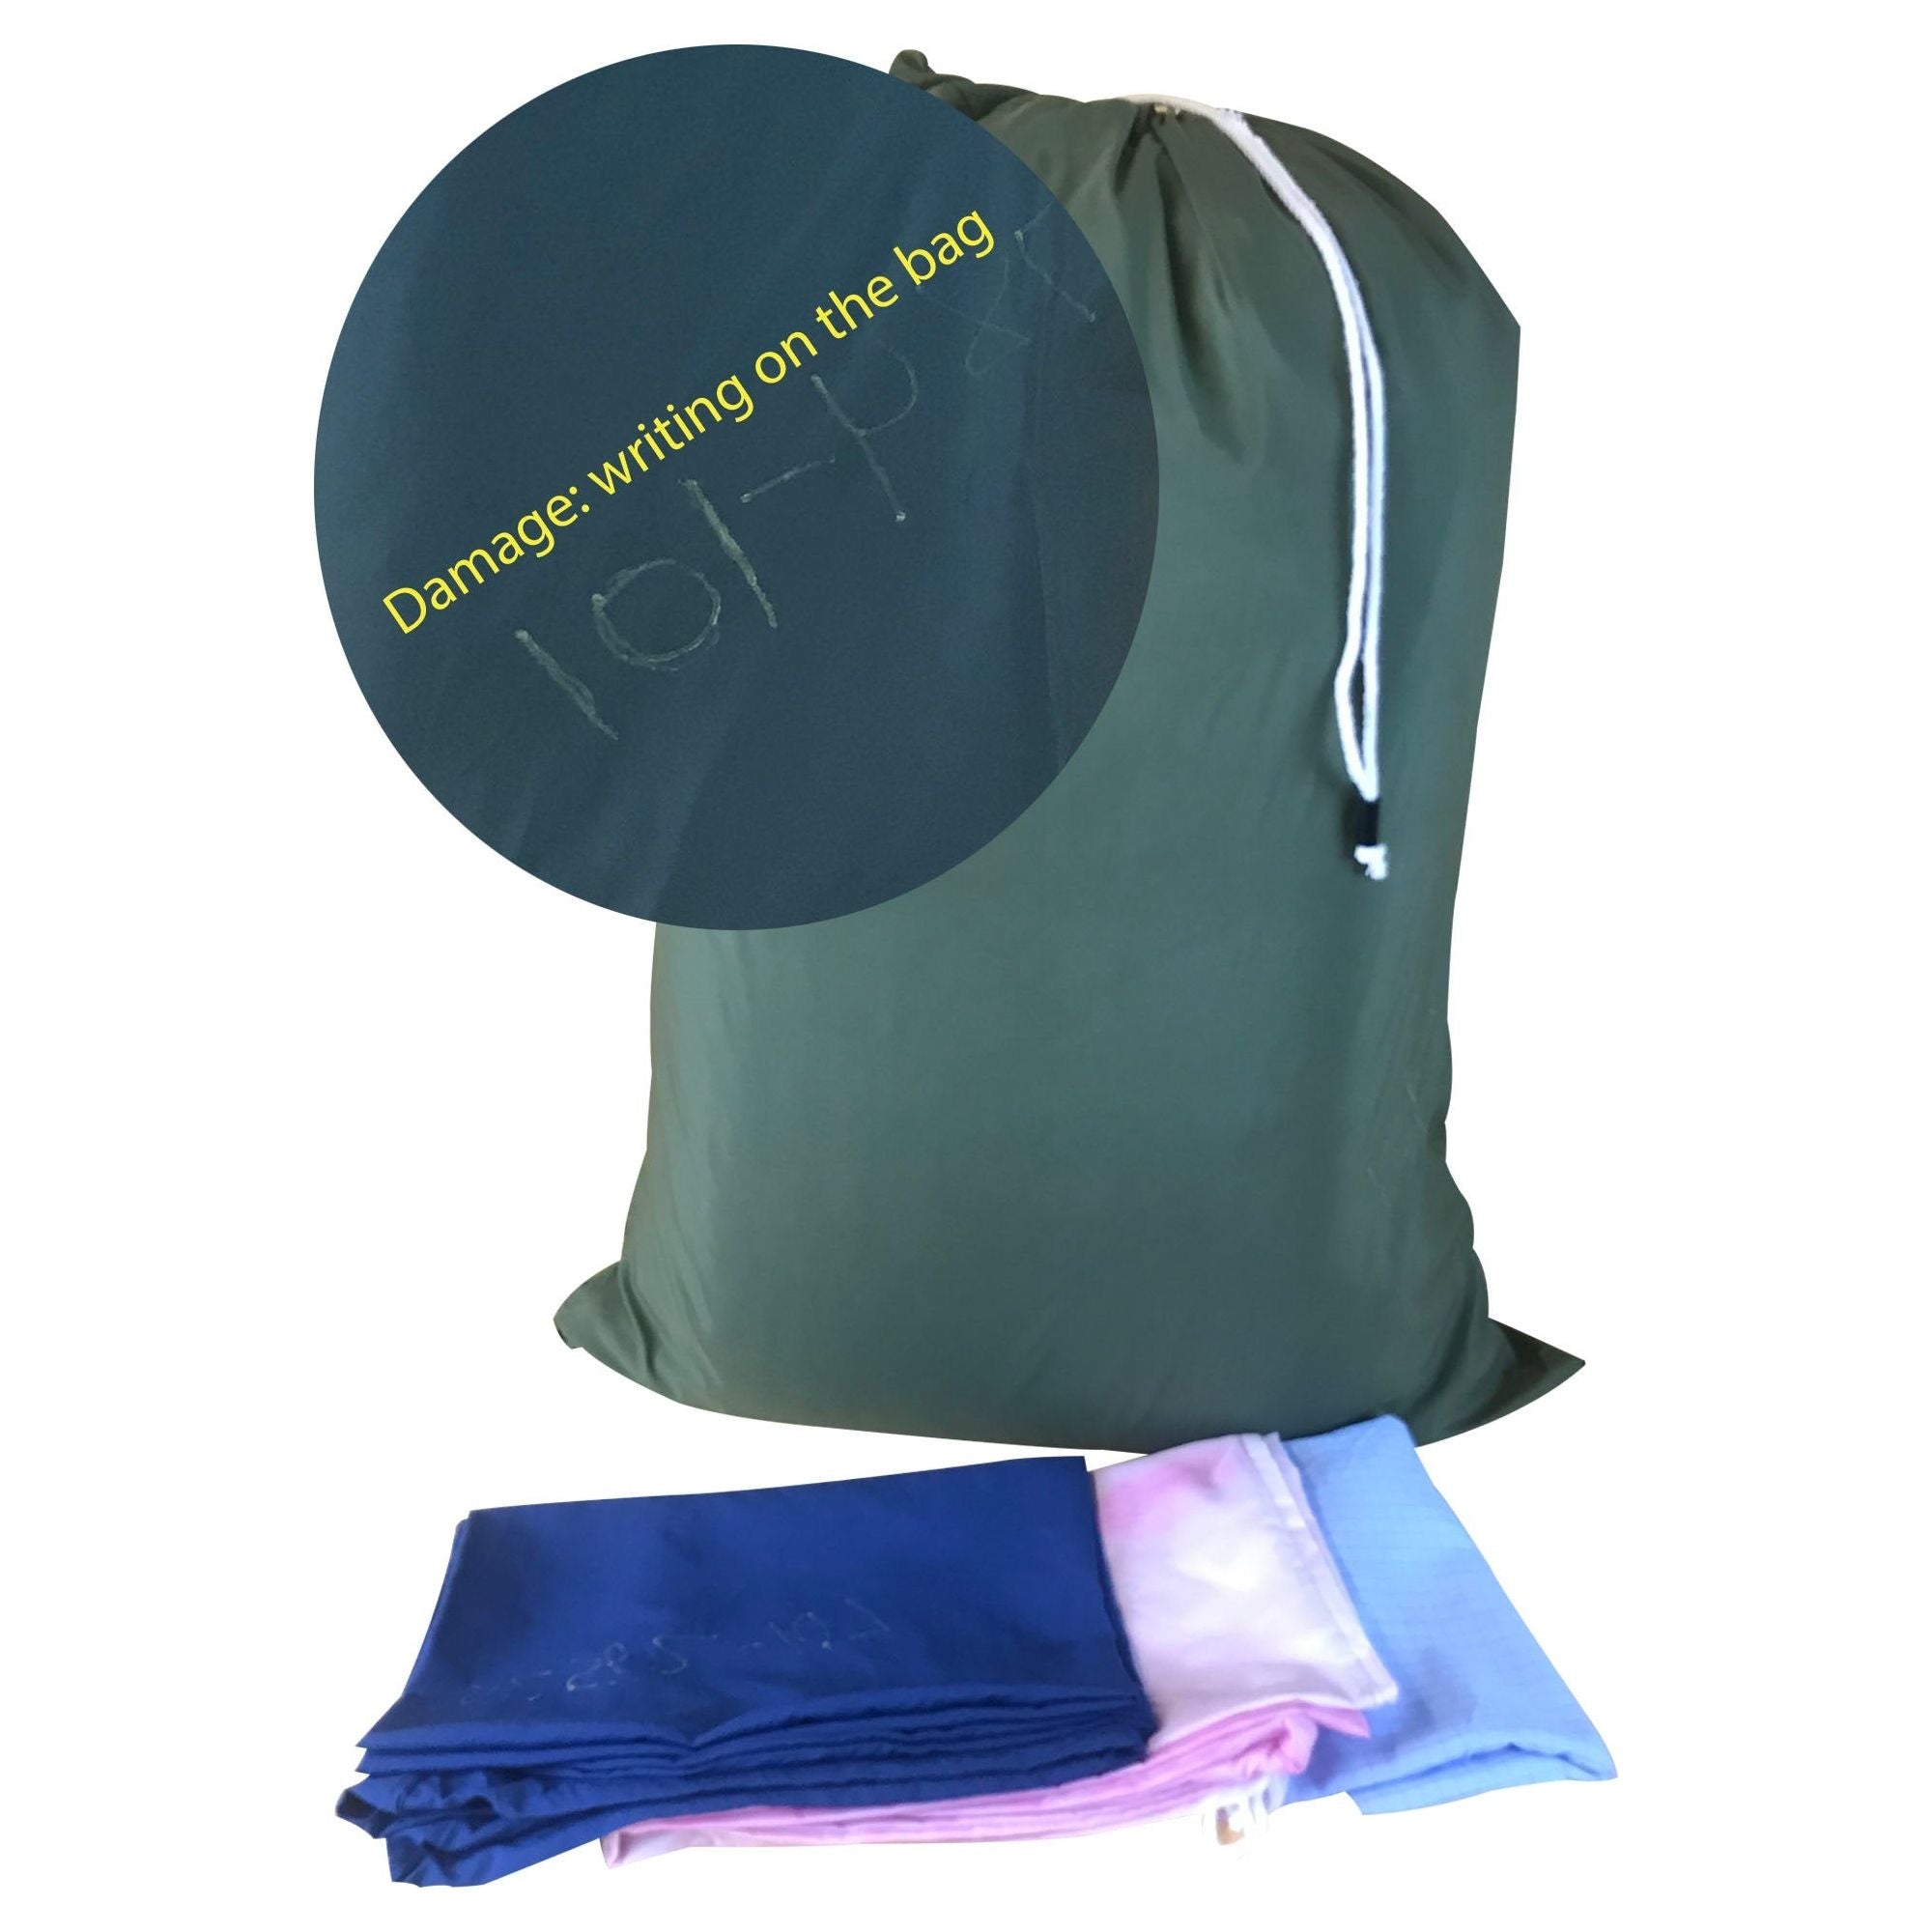 30" x 40" Laundry bags with light damages, mixed Colors, 40 pcs/box, Sold by the Box, Price for 1 bag - As low as $1.25 ea. bag